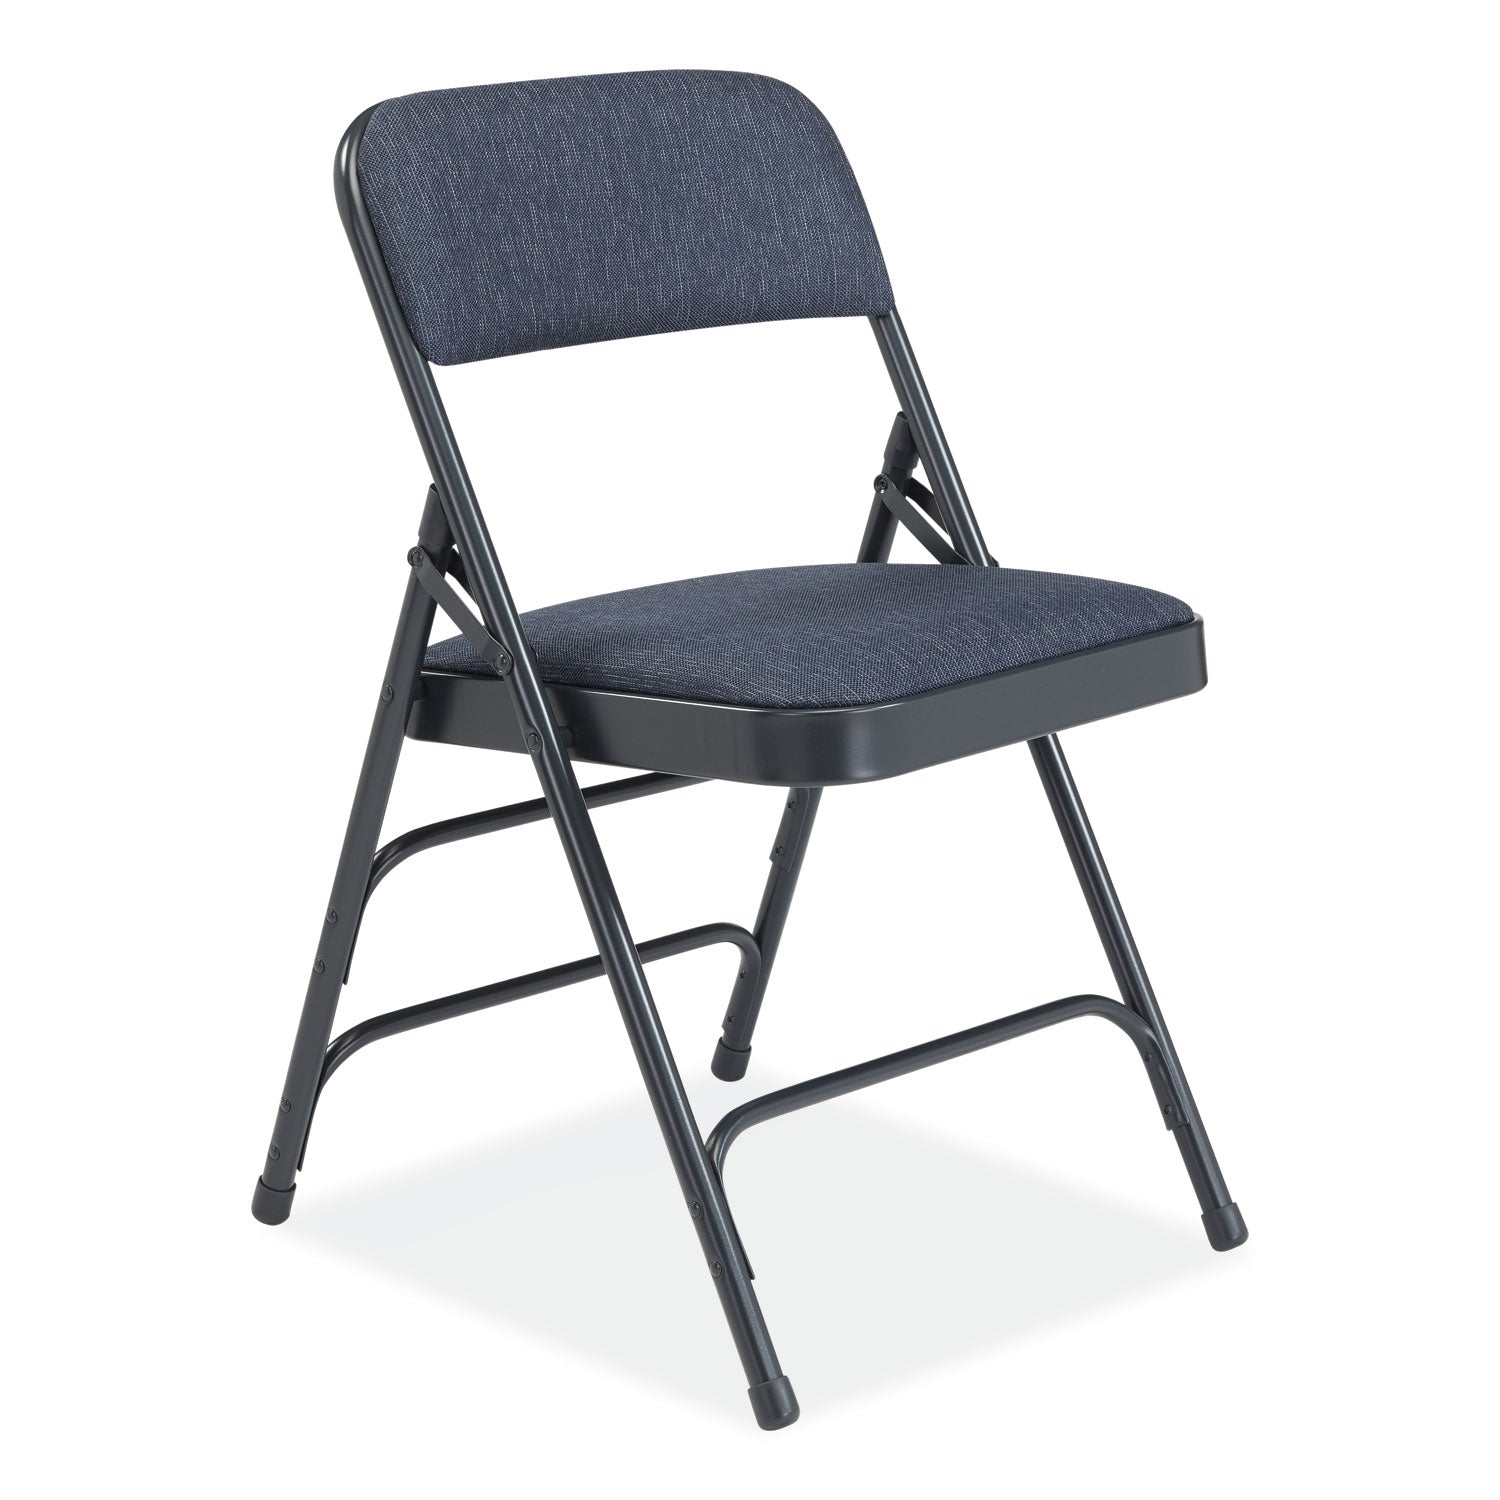 2300-series-deluxe-fabric-upholstered-triple-brace-folding-chair-supports-500-lb-imperial-blue-4-ct-ships-in-1-3-bus-days_nps2304 - 2